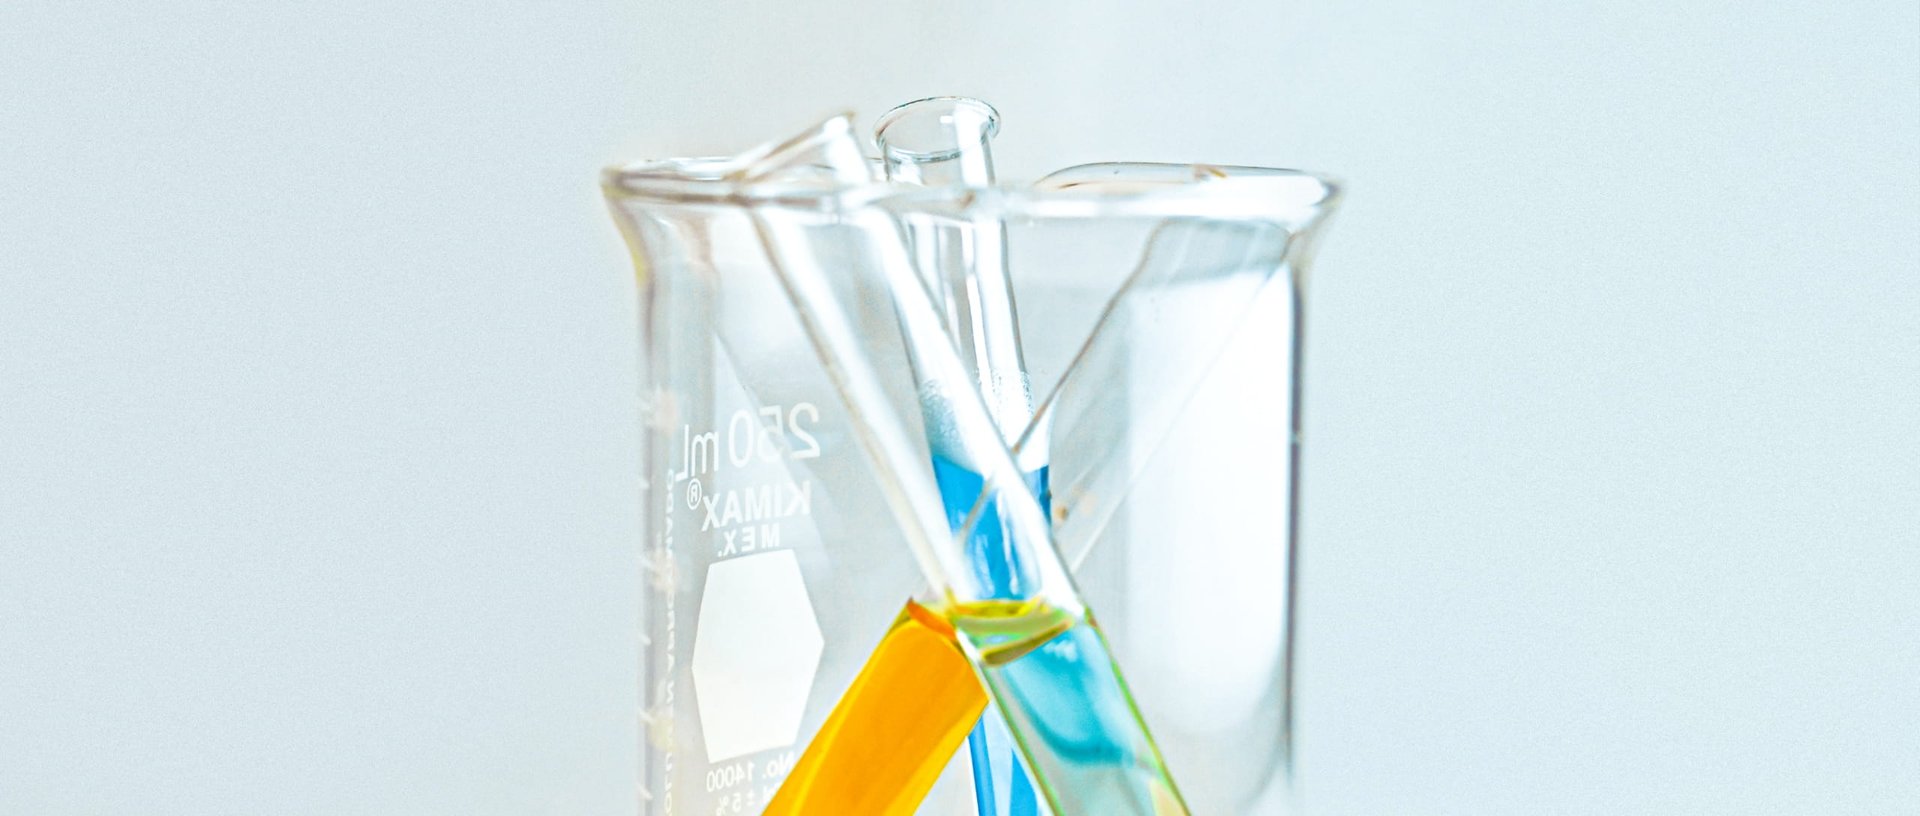 Chemistry test tubes in a mesuring container